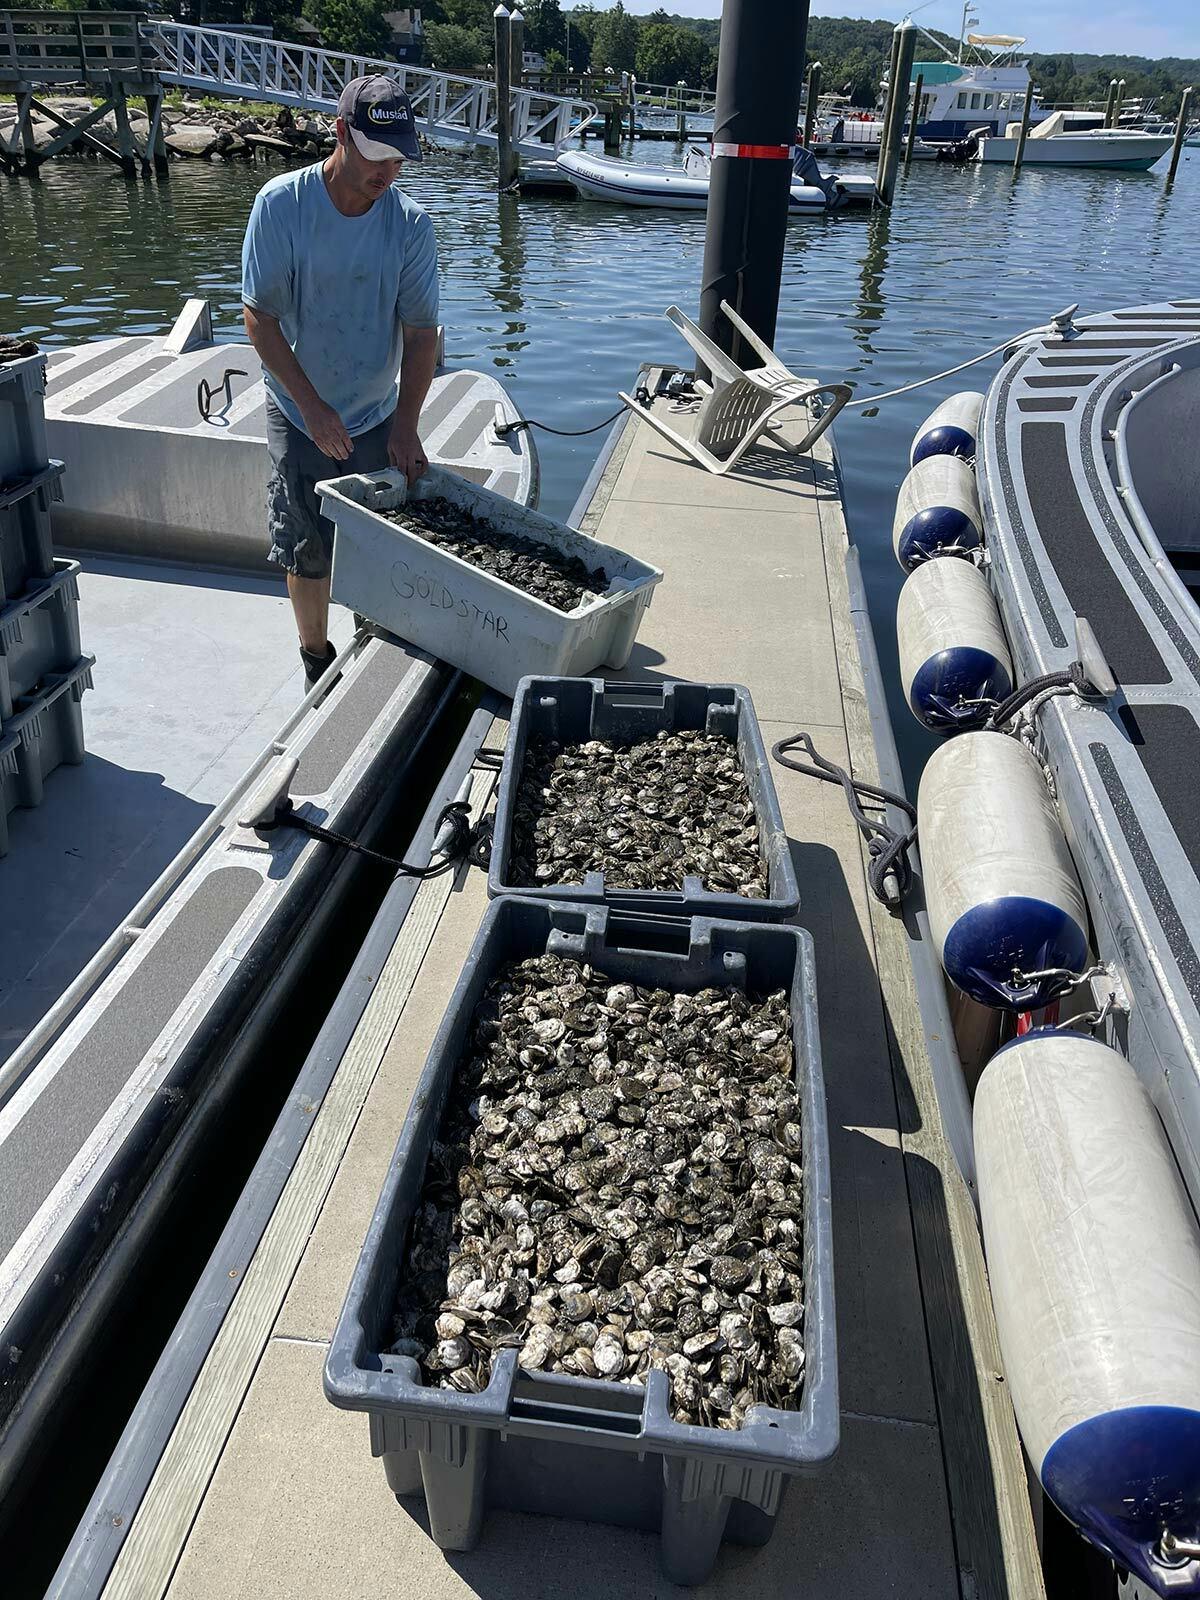 Approximately 125,000 single set oysters are loaded into the boat for deployment.